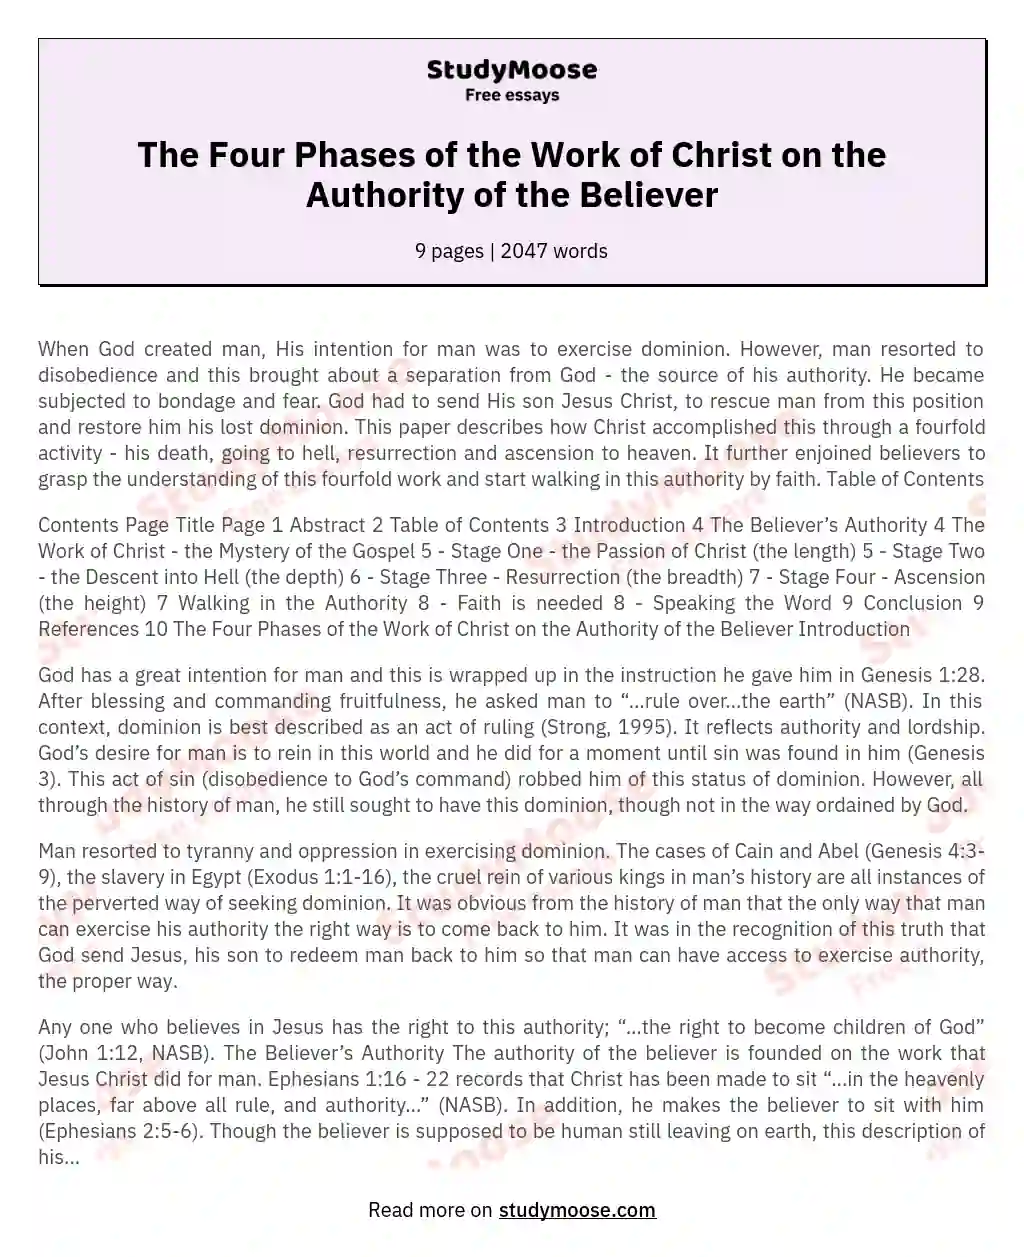 The Four Phases of the Work of Christ on the Authority of the Believer essay